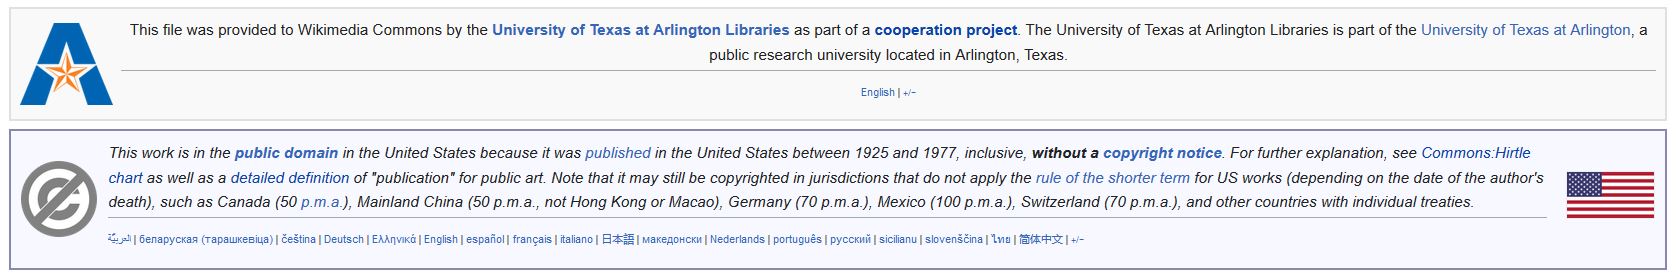 UTA Libraries cooperation header template and text of the US "no notice" public domain statement on Wikimedia Commons.